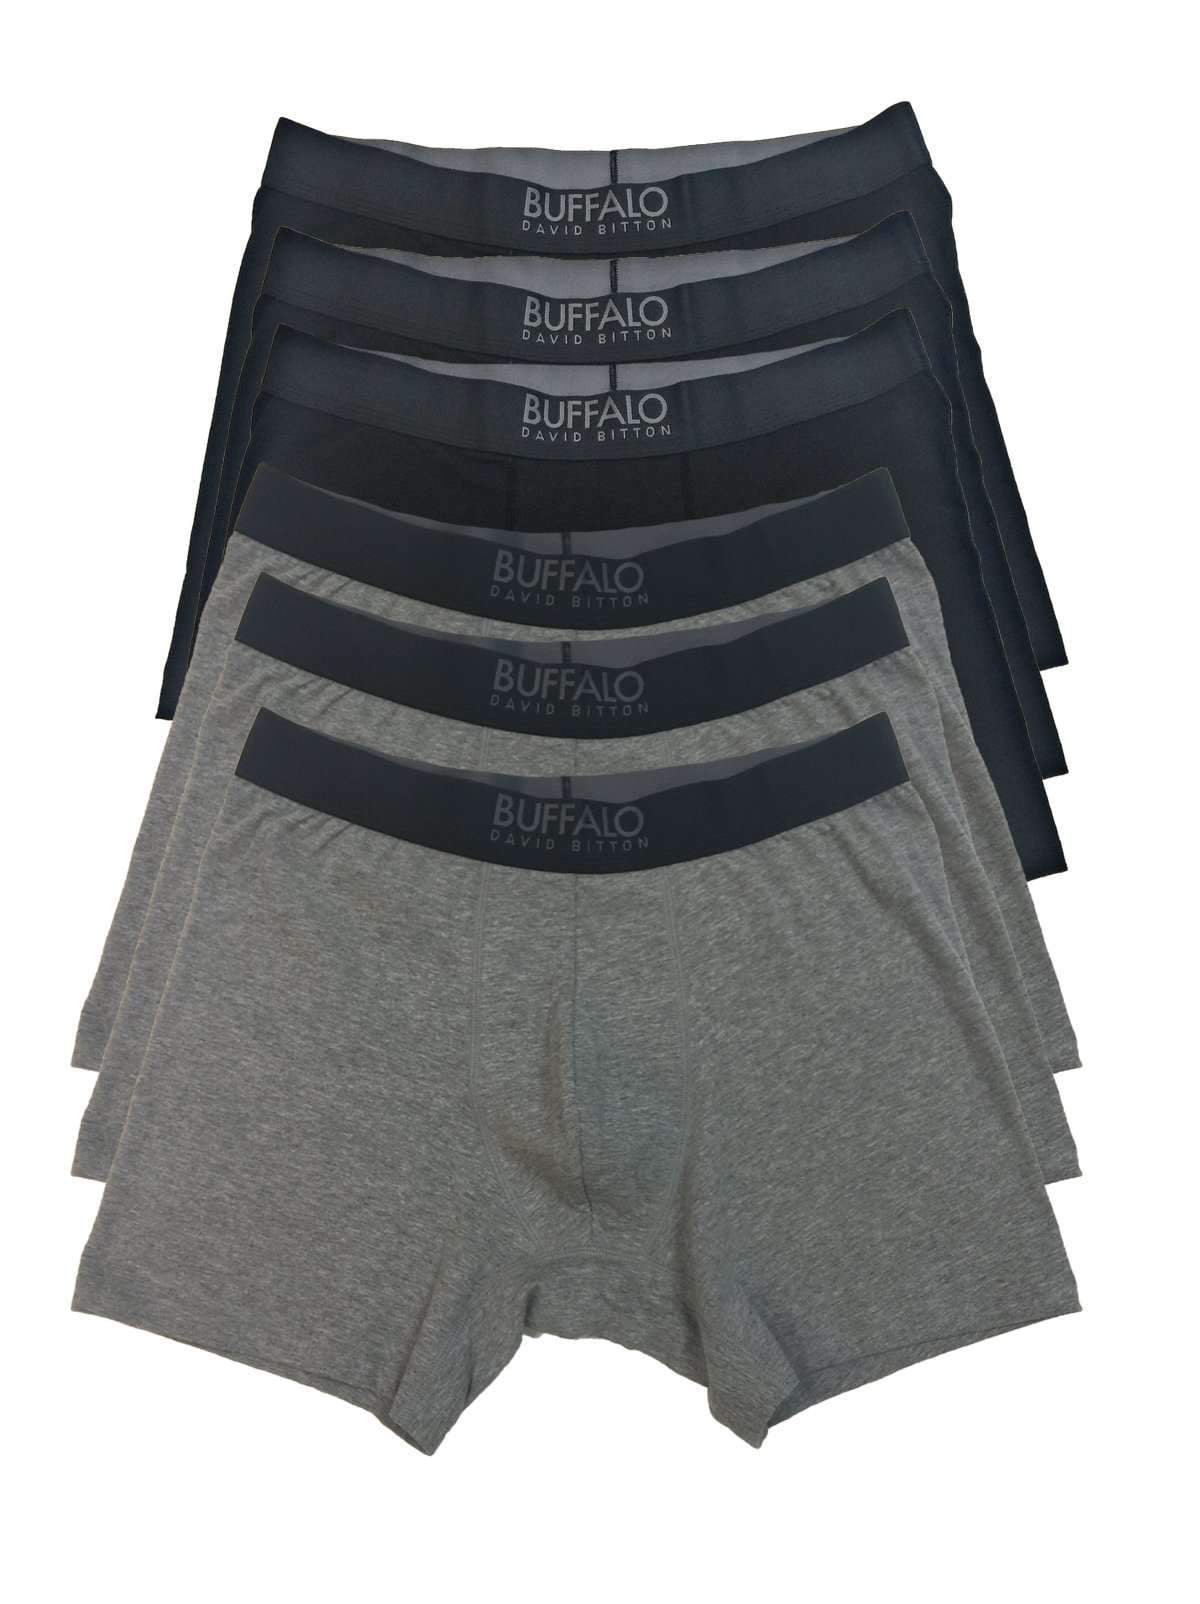 Buffalo | Boxer Brief 6-Pack | Mid Rise | Flyless | Support | Seamless ...